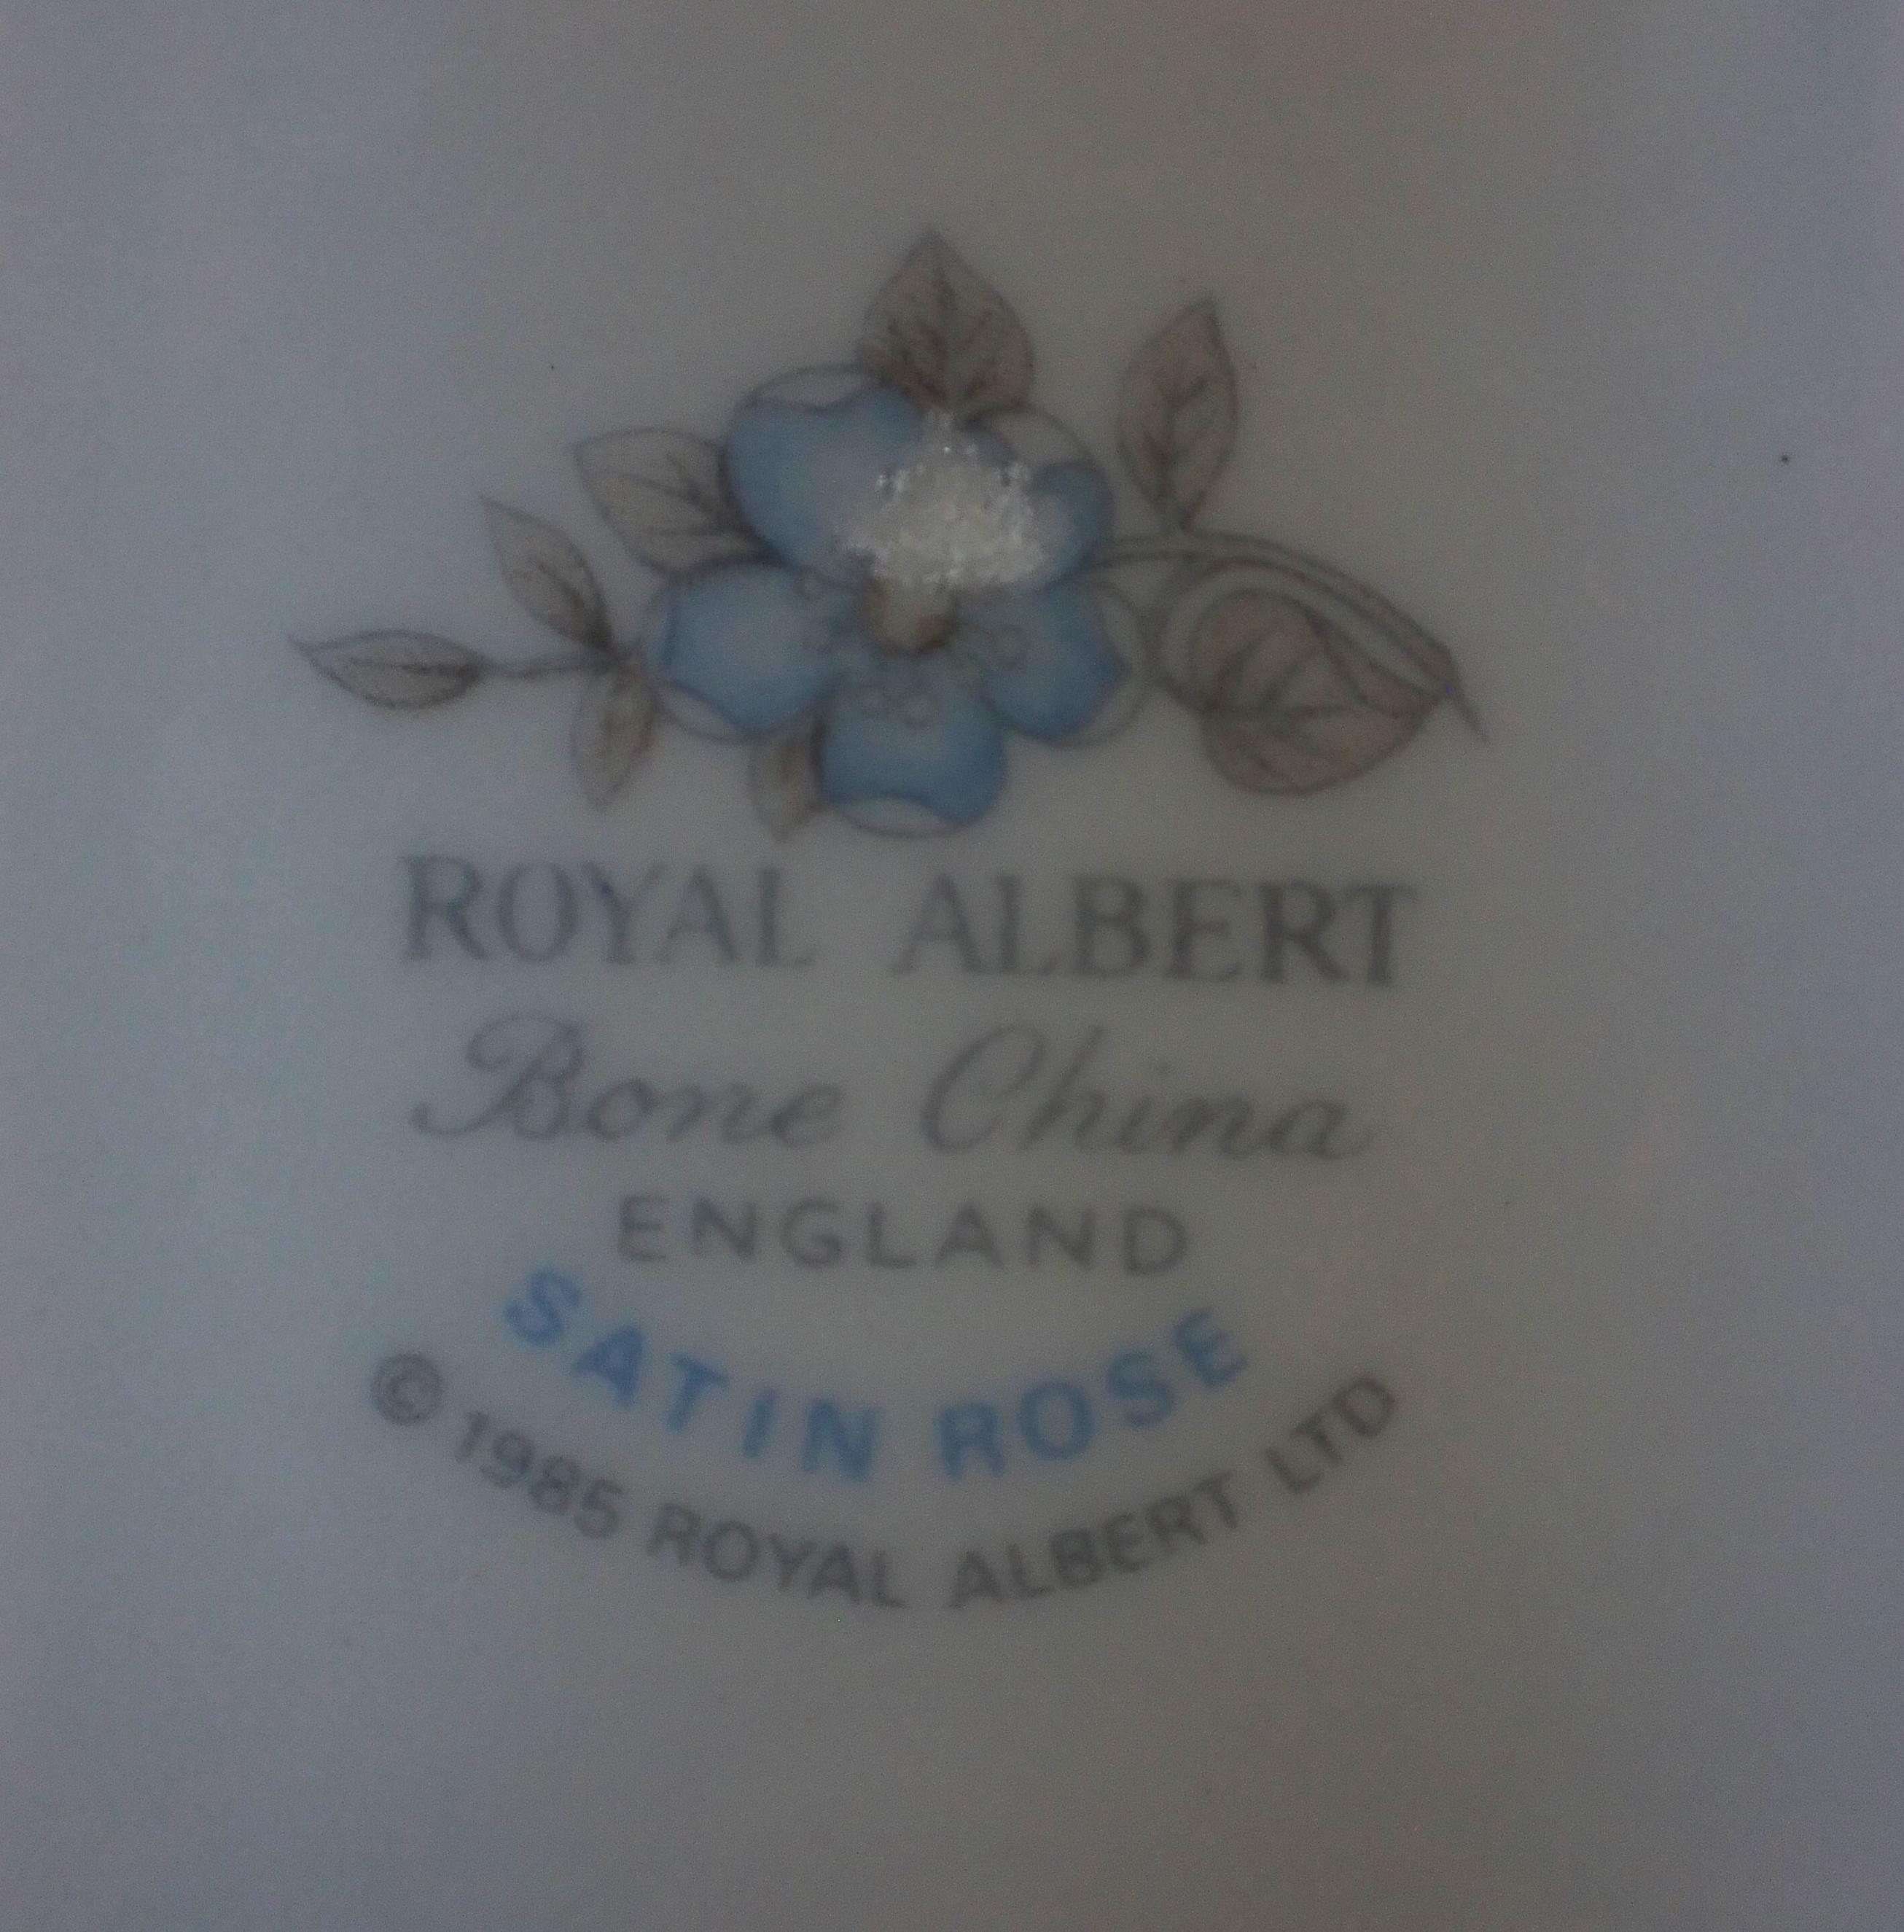 A ROYAL ALBERT 'SATIN ROSE' SERVICE FOR SIX - Image 5 of 5